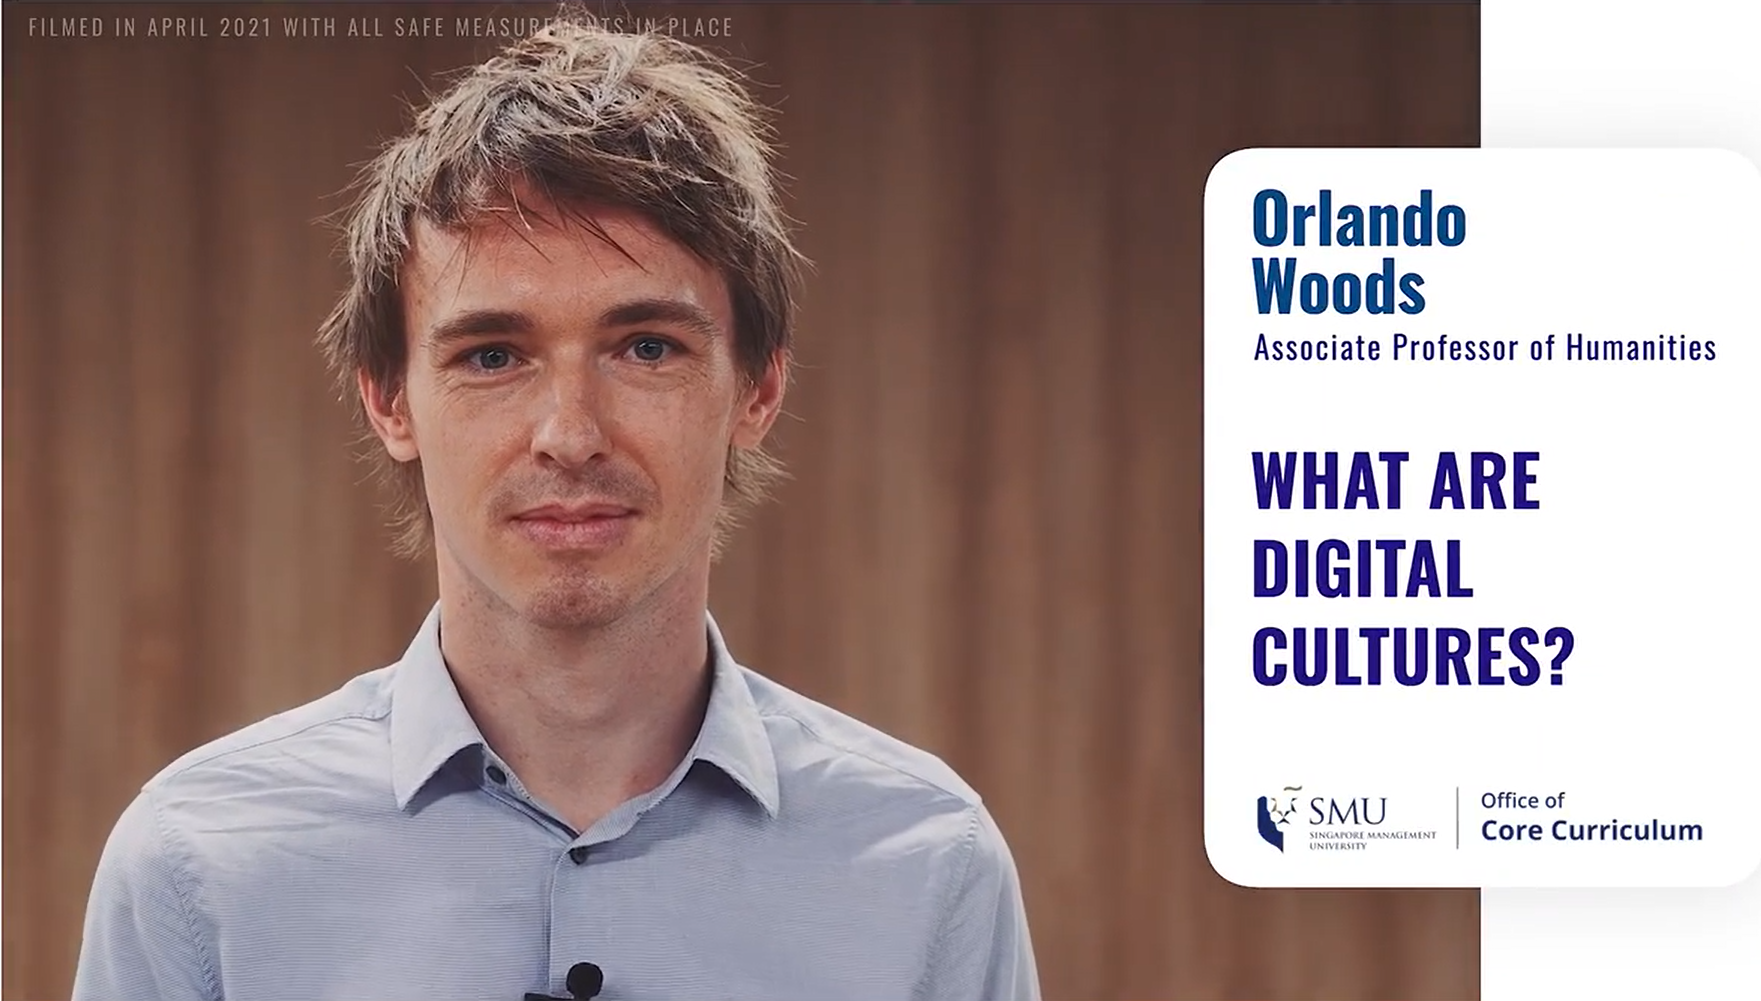 Orlando Woods - What are Digital Cultures?